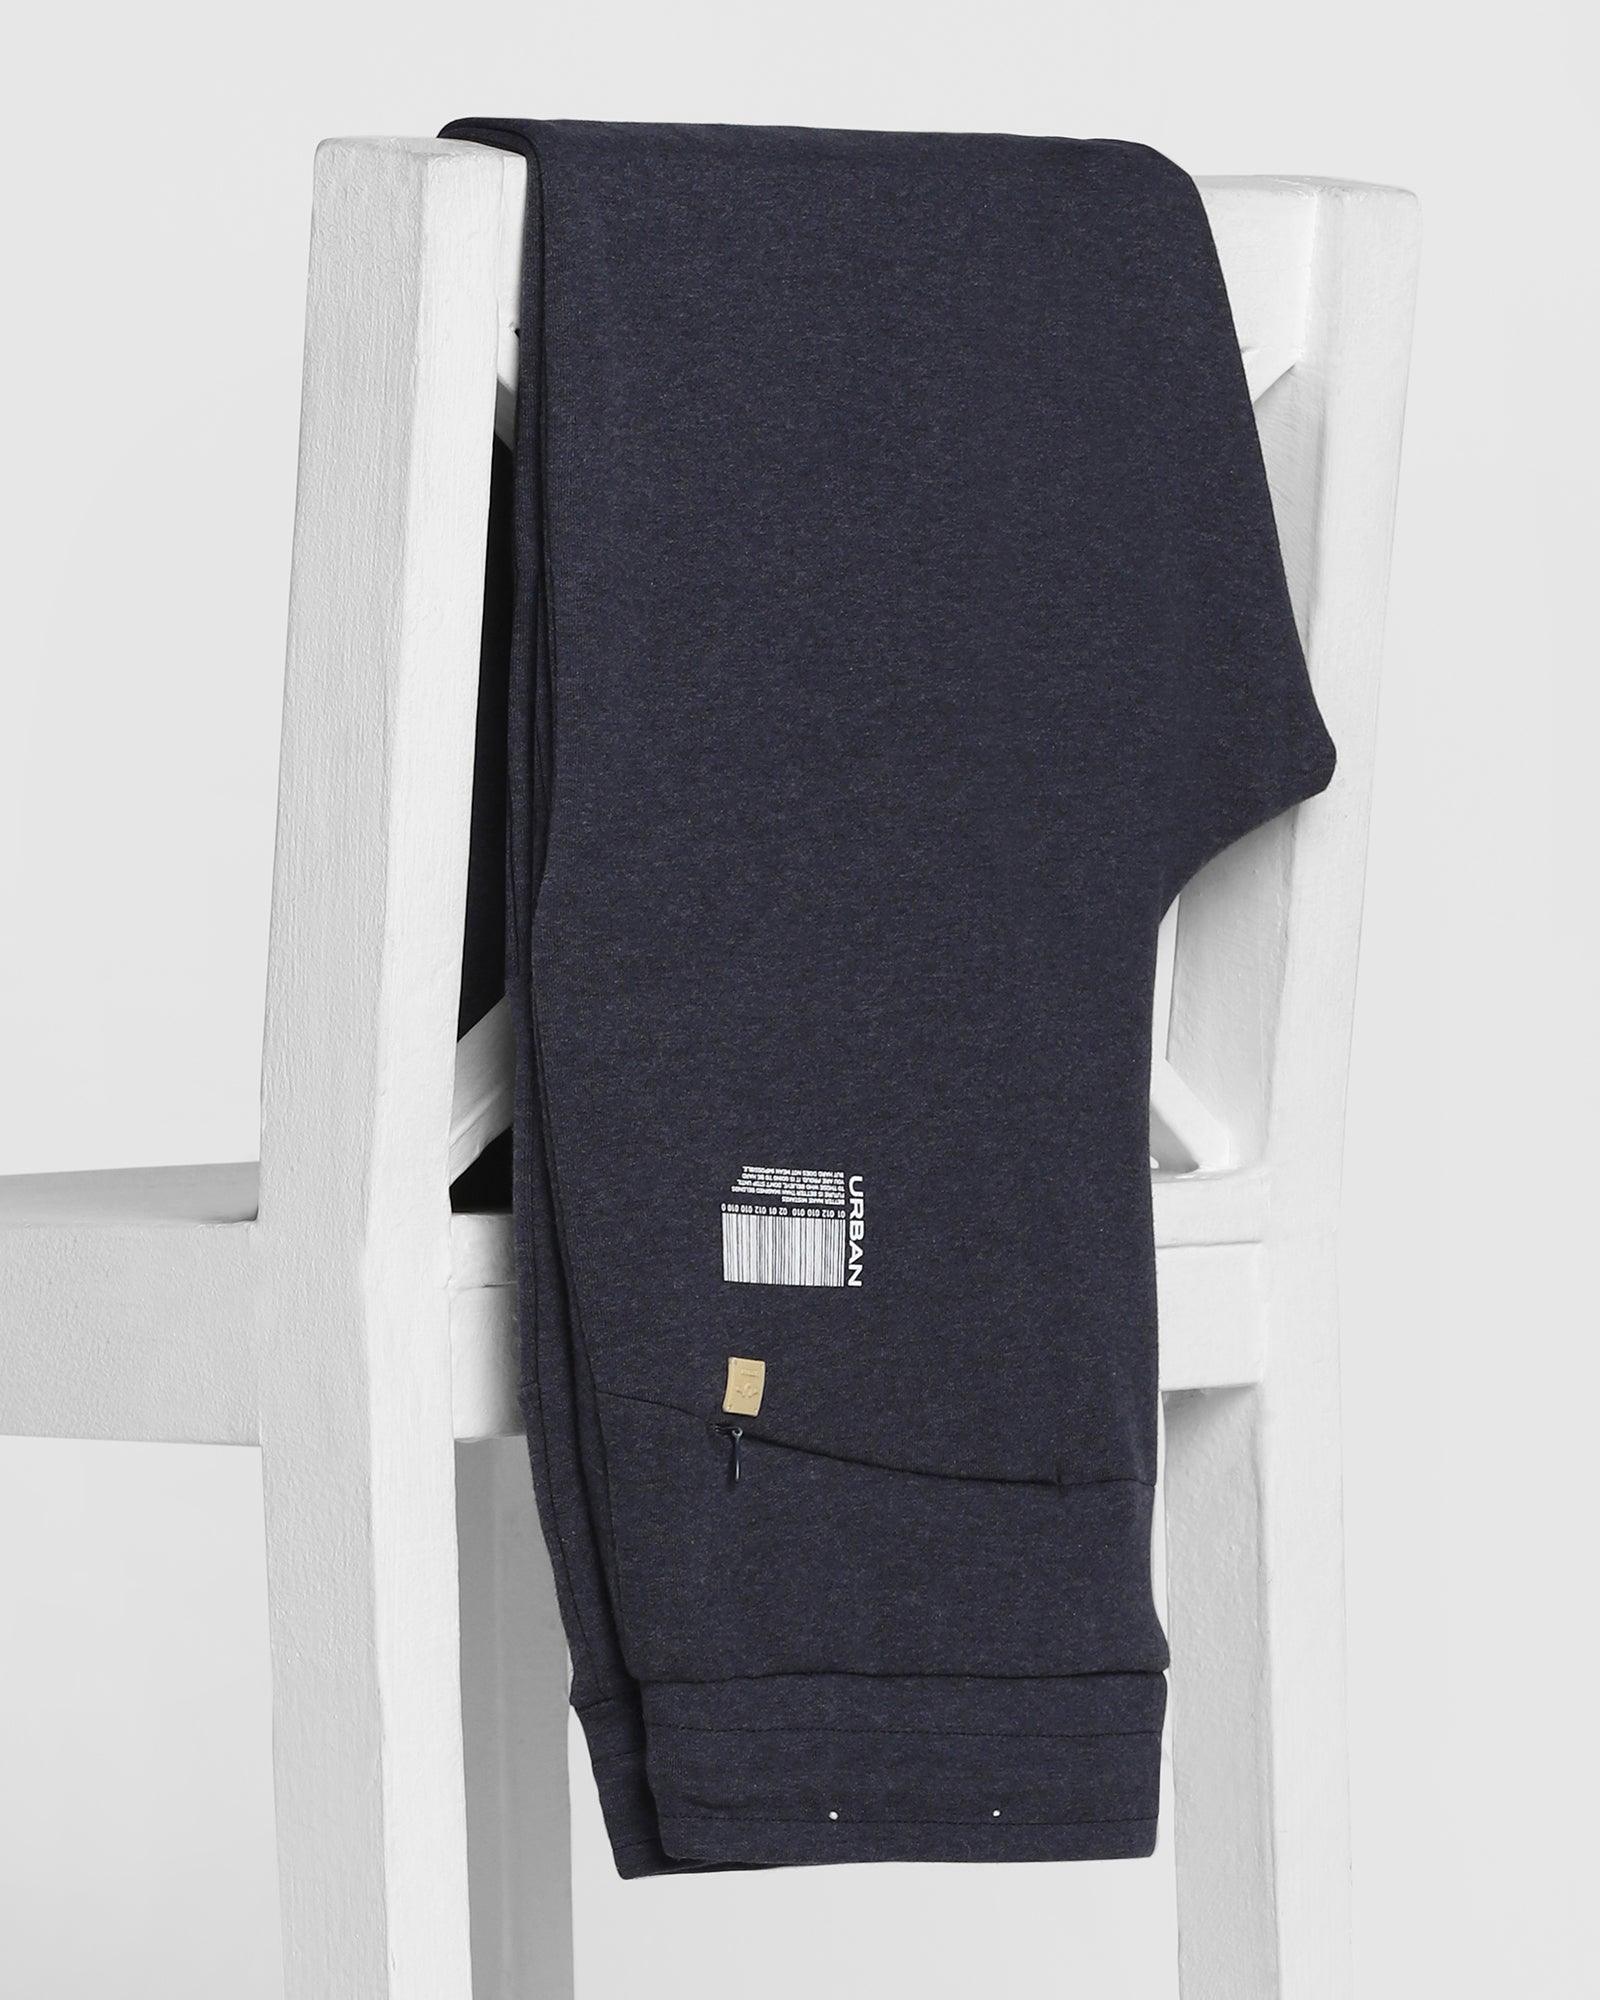 Casual Navy Solid Jogger - Menis